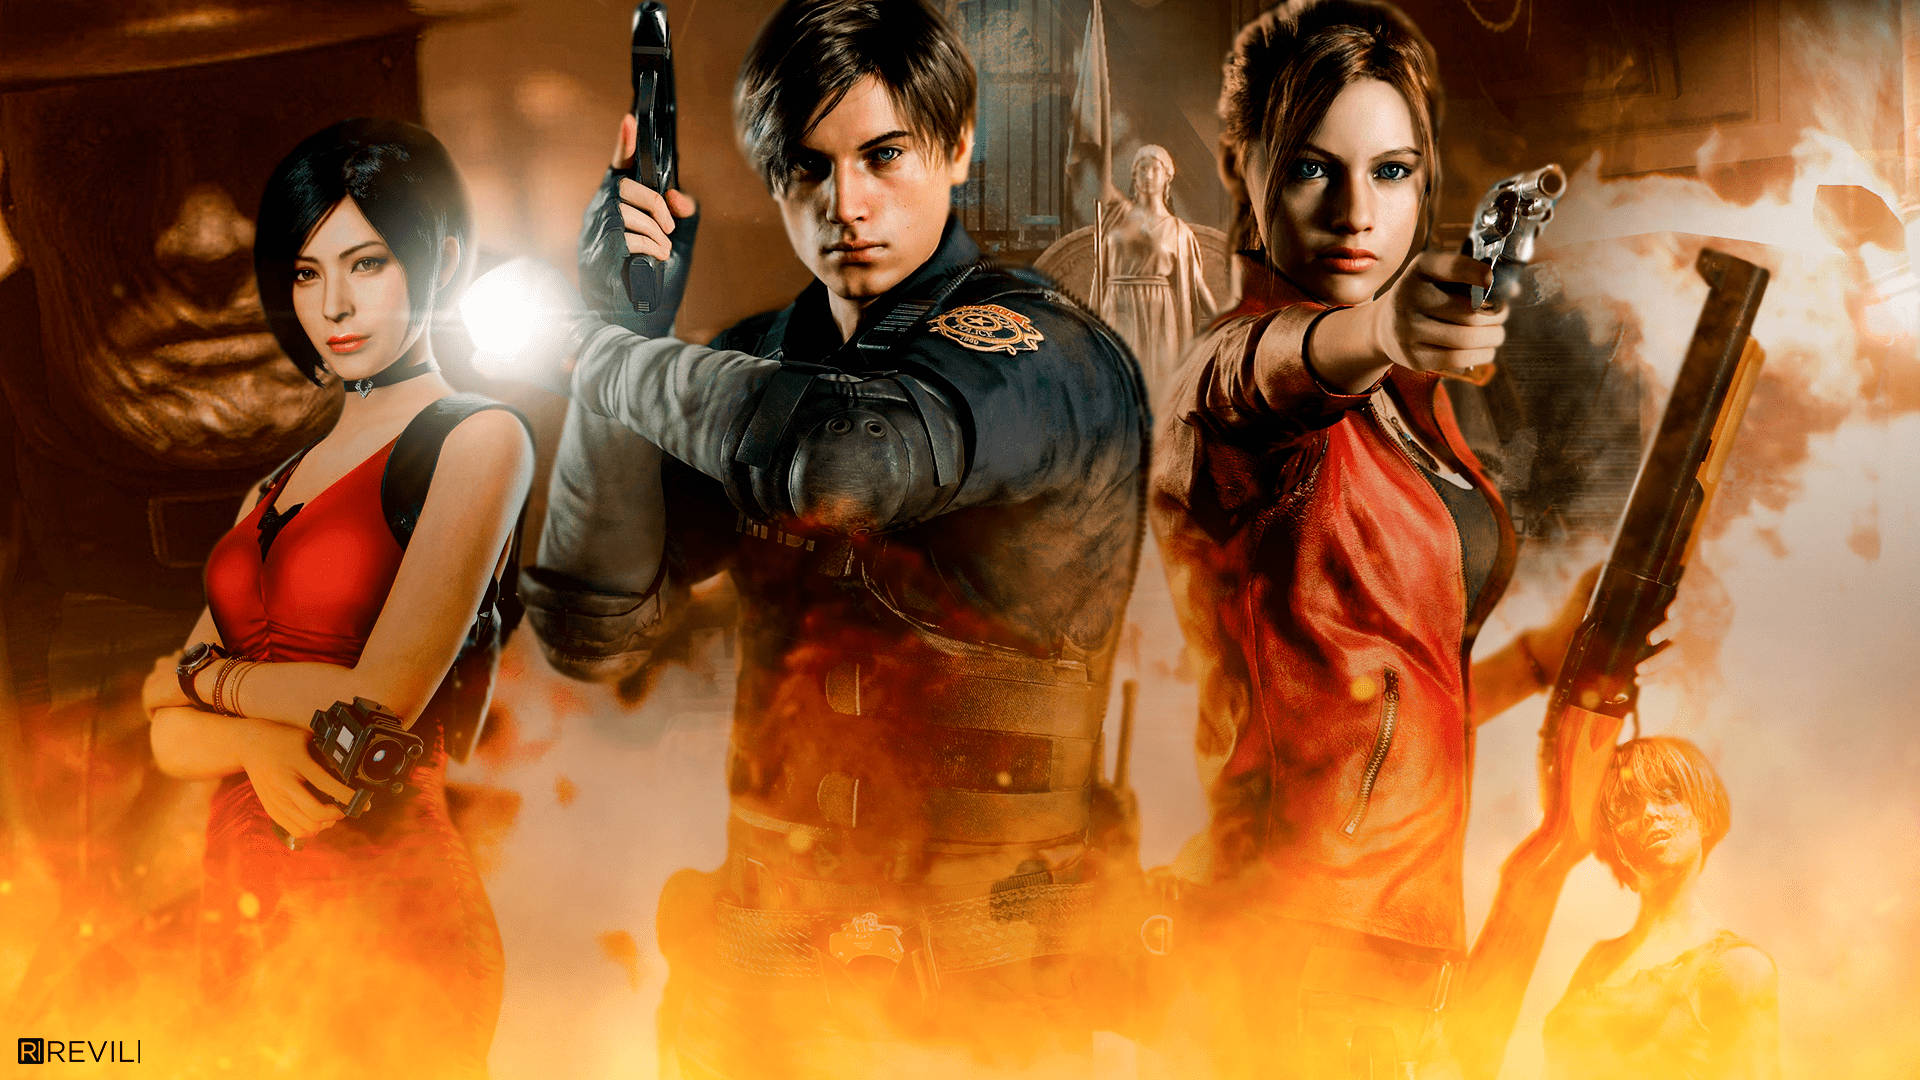 Ada, Leon, Claire Resident Evil 2 Remake Background